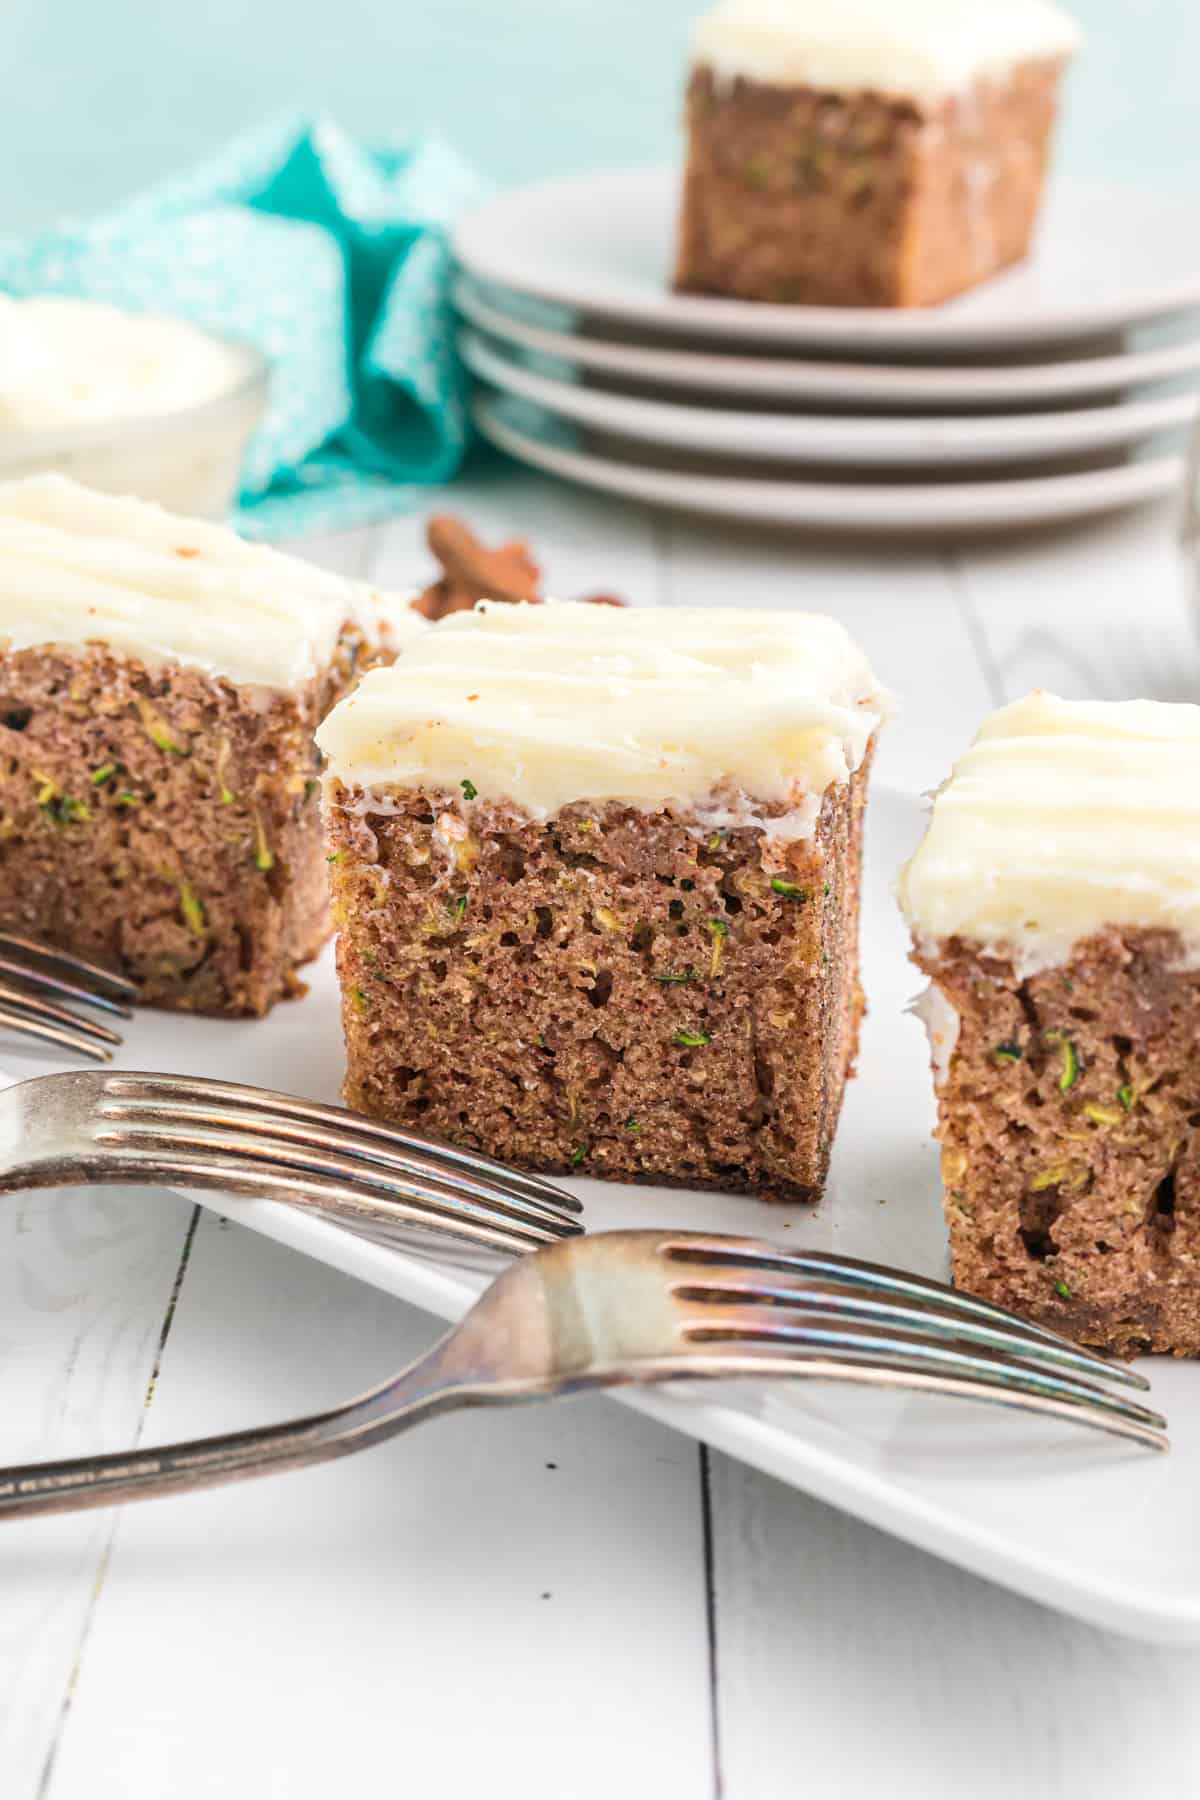 Several slices of zucchini cake are presented next to two forks on a white plate.